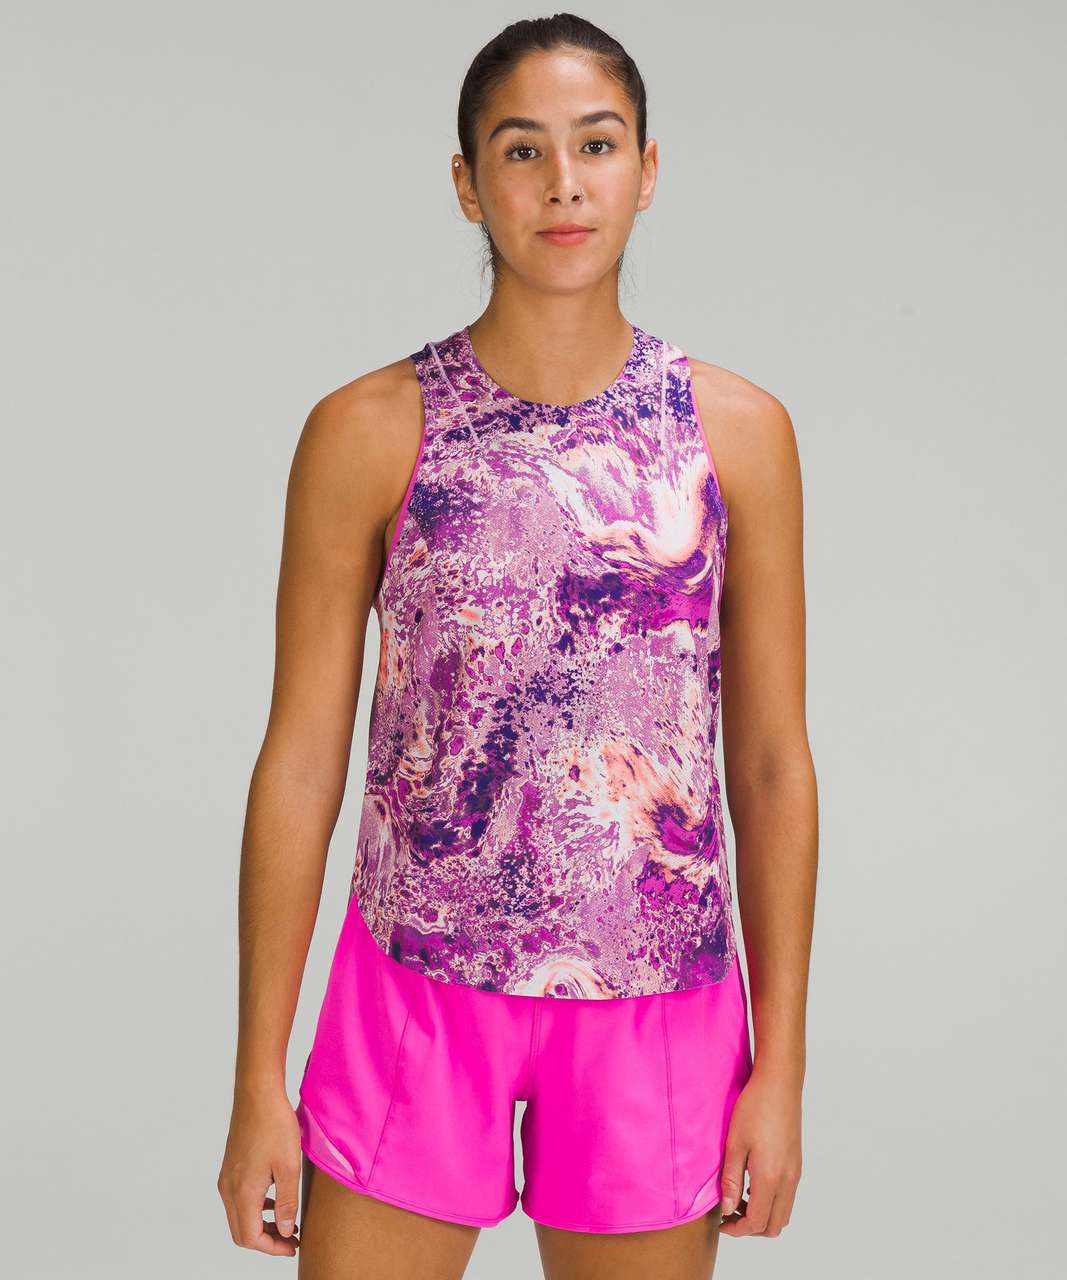 lululemon athletica, Tops, Lululemon Athletica Color Of The Moment Hot  Pink Crochet Tank Top 8